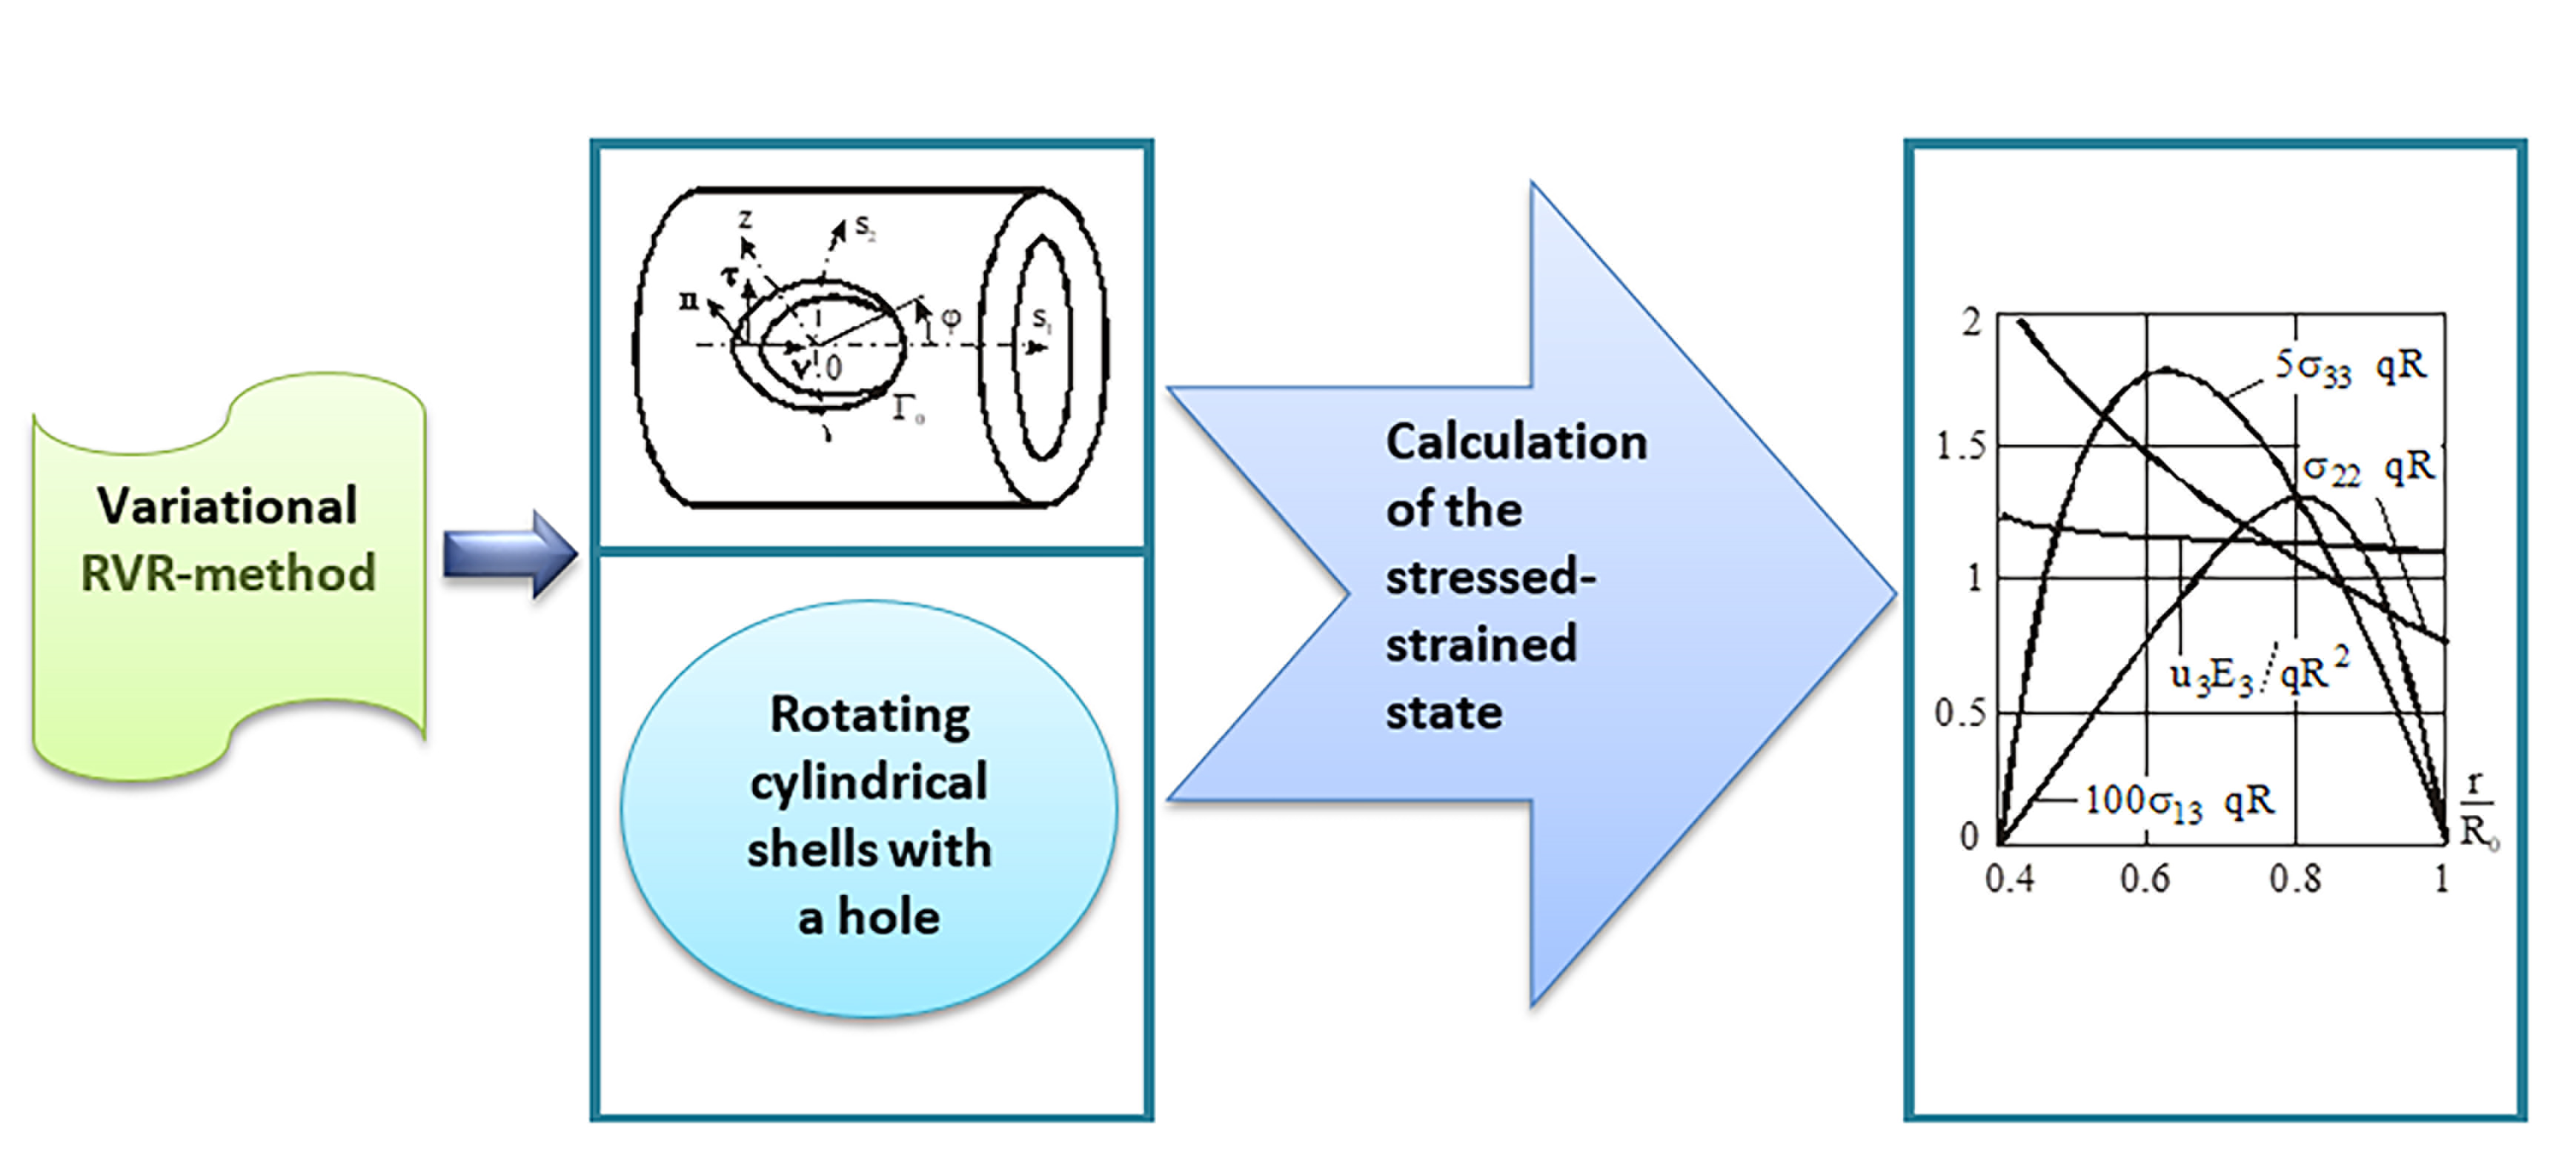 Calculation of the stressed-strained state of rotating anisotropic cylindrical shells with a hole based on variational RVR-method 